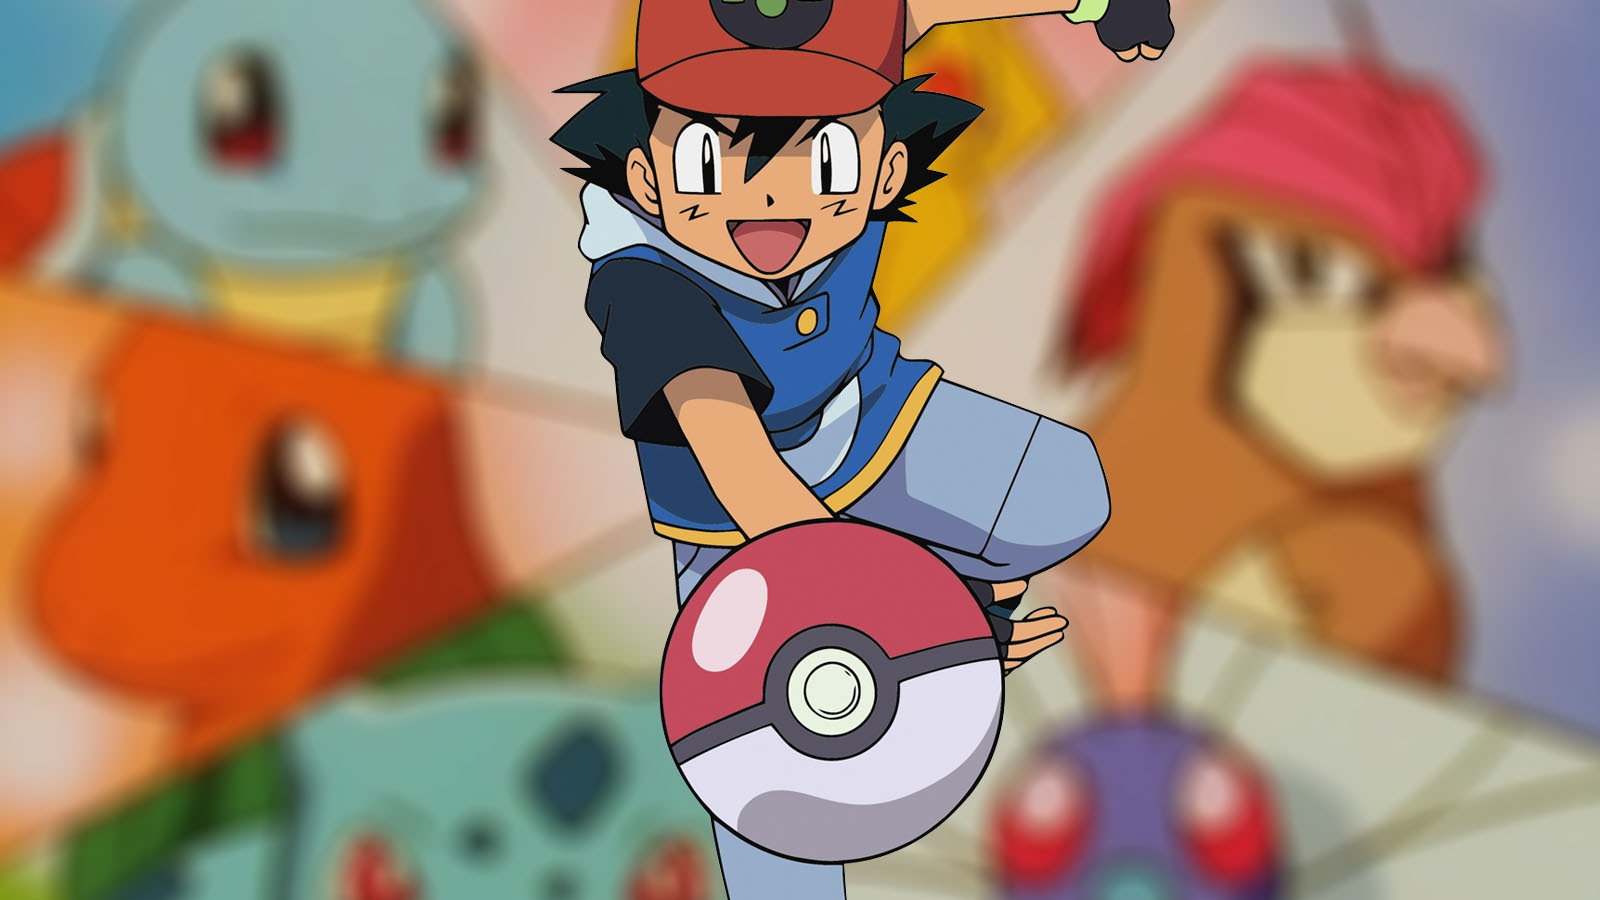 Anime Pokemon Ash by EzioAuditore  Mobile Abyss